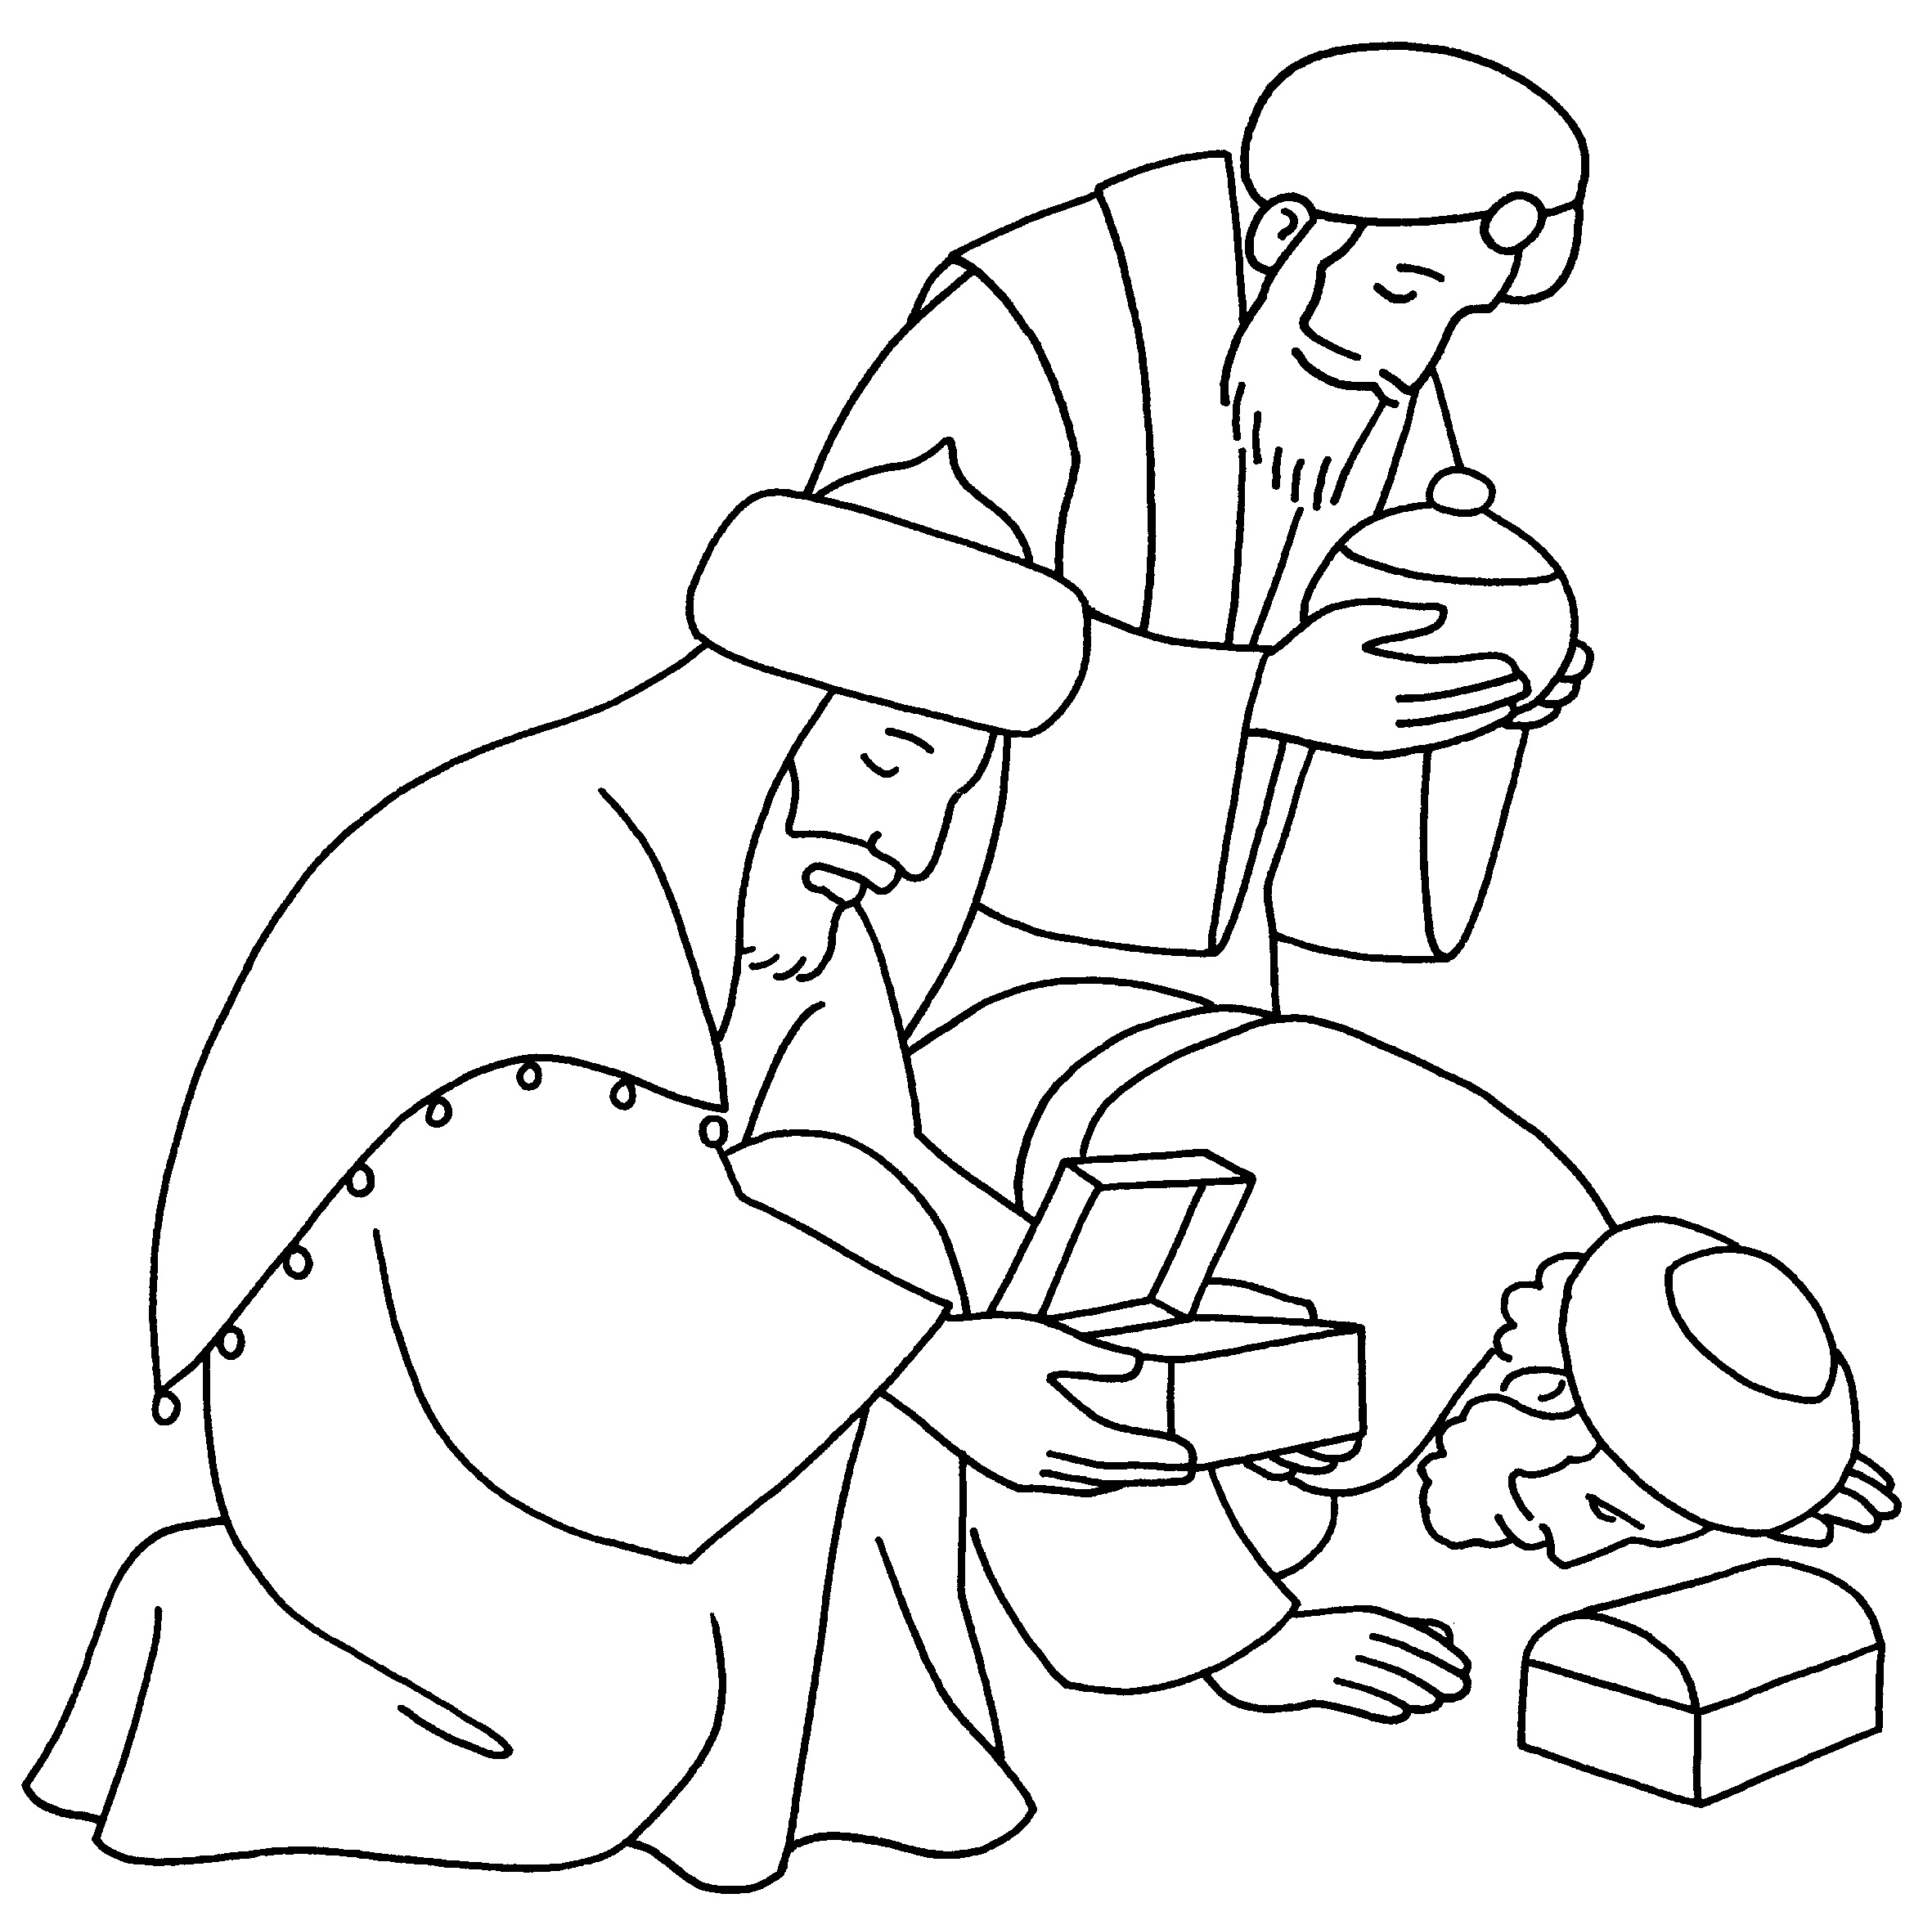 The Wise Men Prayer coloring page